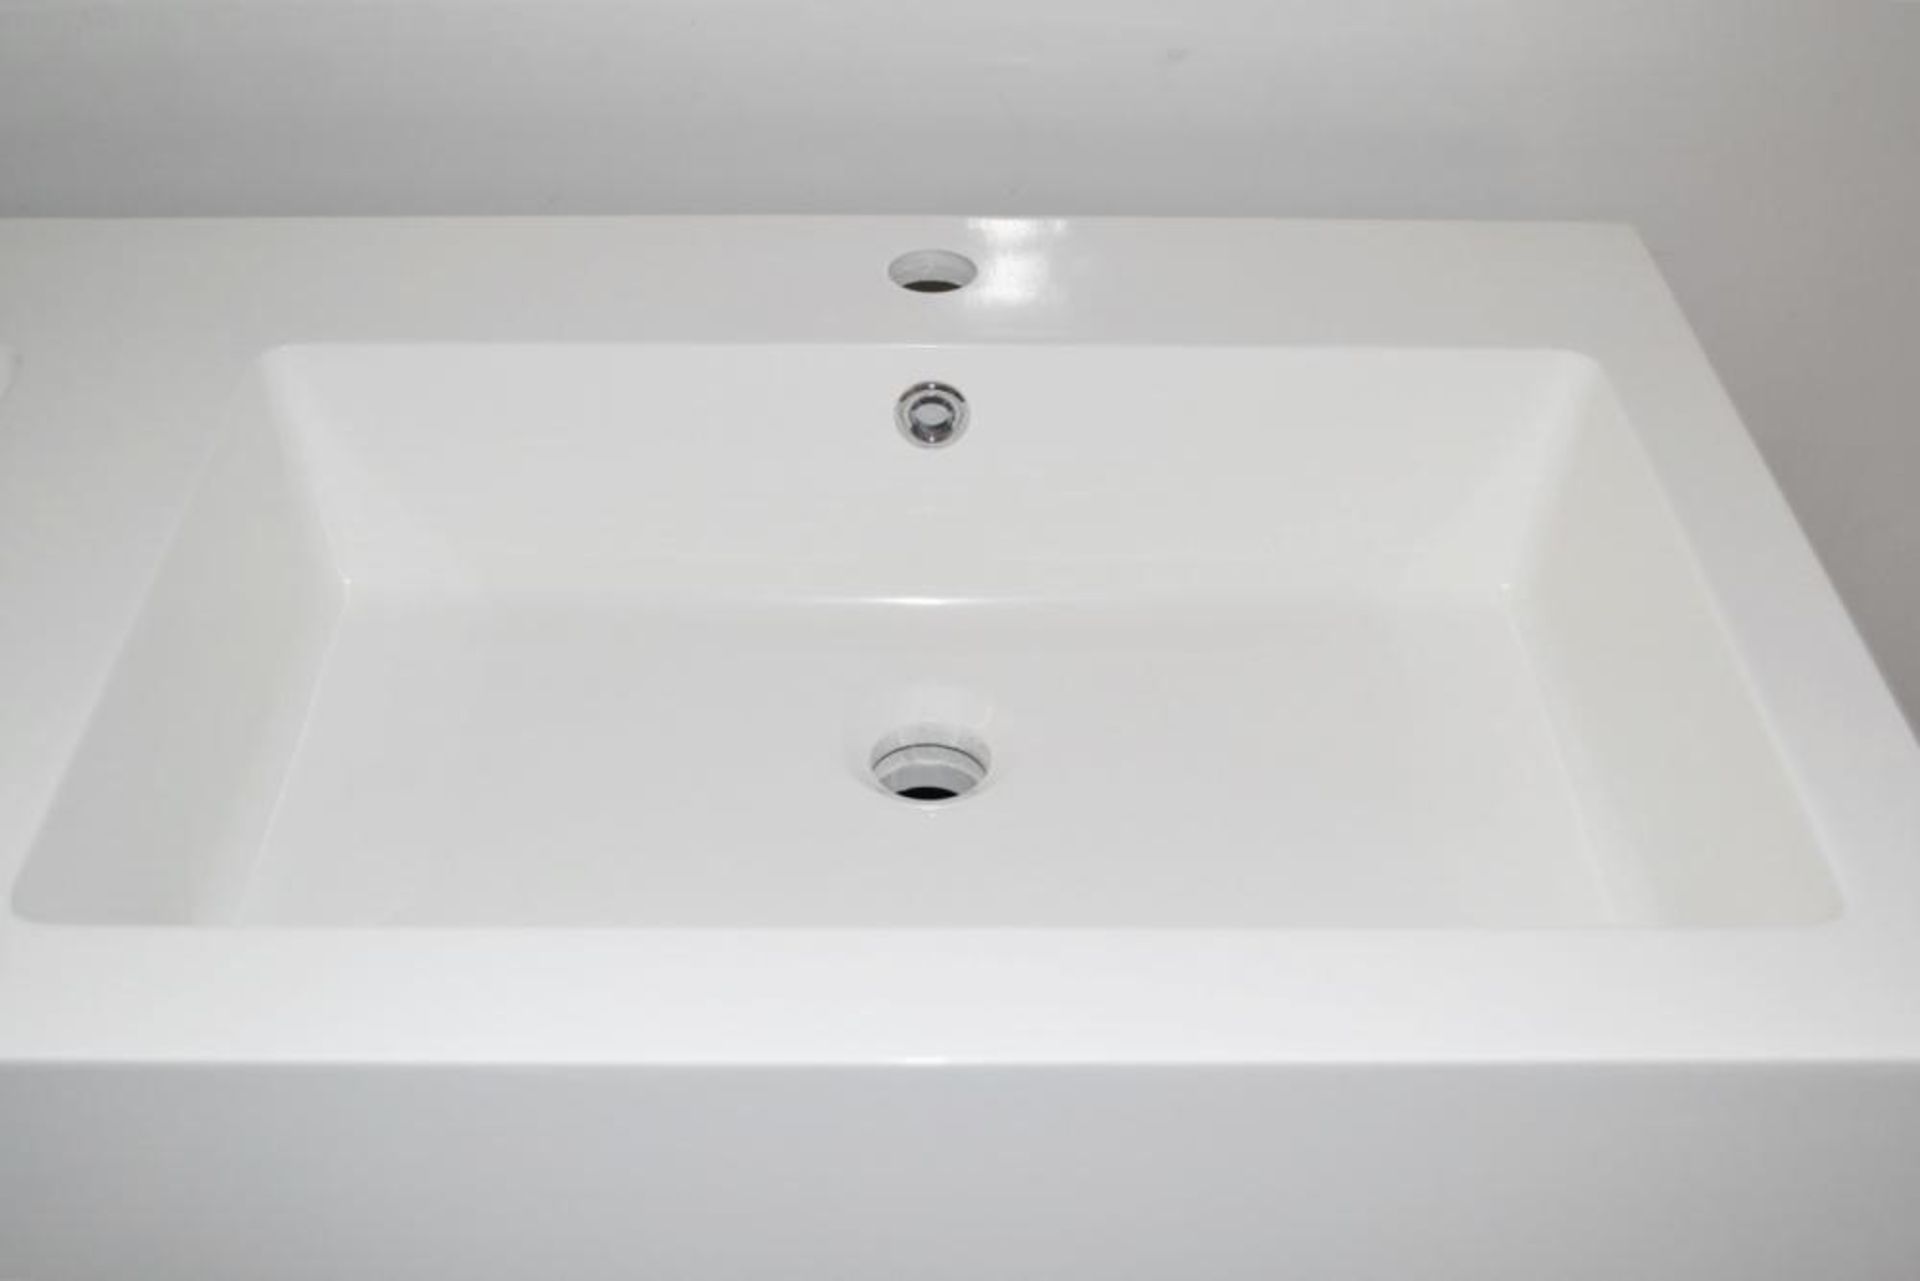 1 x Gloss White 1200mm 4-Door Double Basin Freestanding Bathroom Cabinet - New & Boxed Stock - CL307 - Image 6 of 6